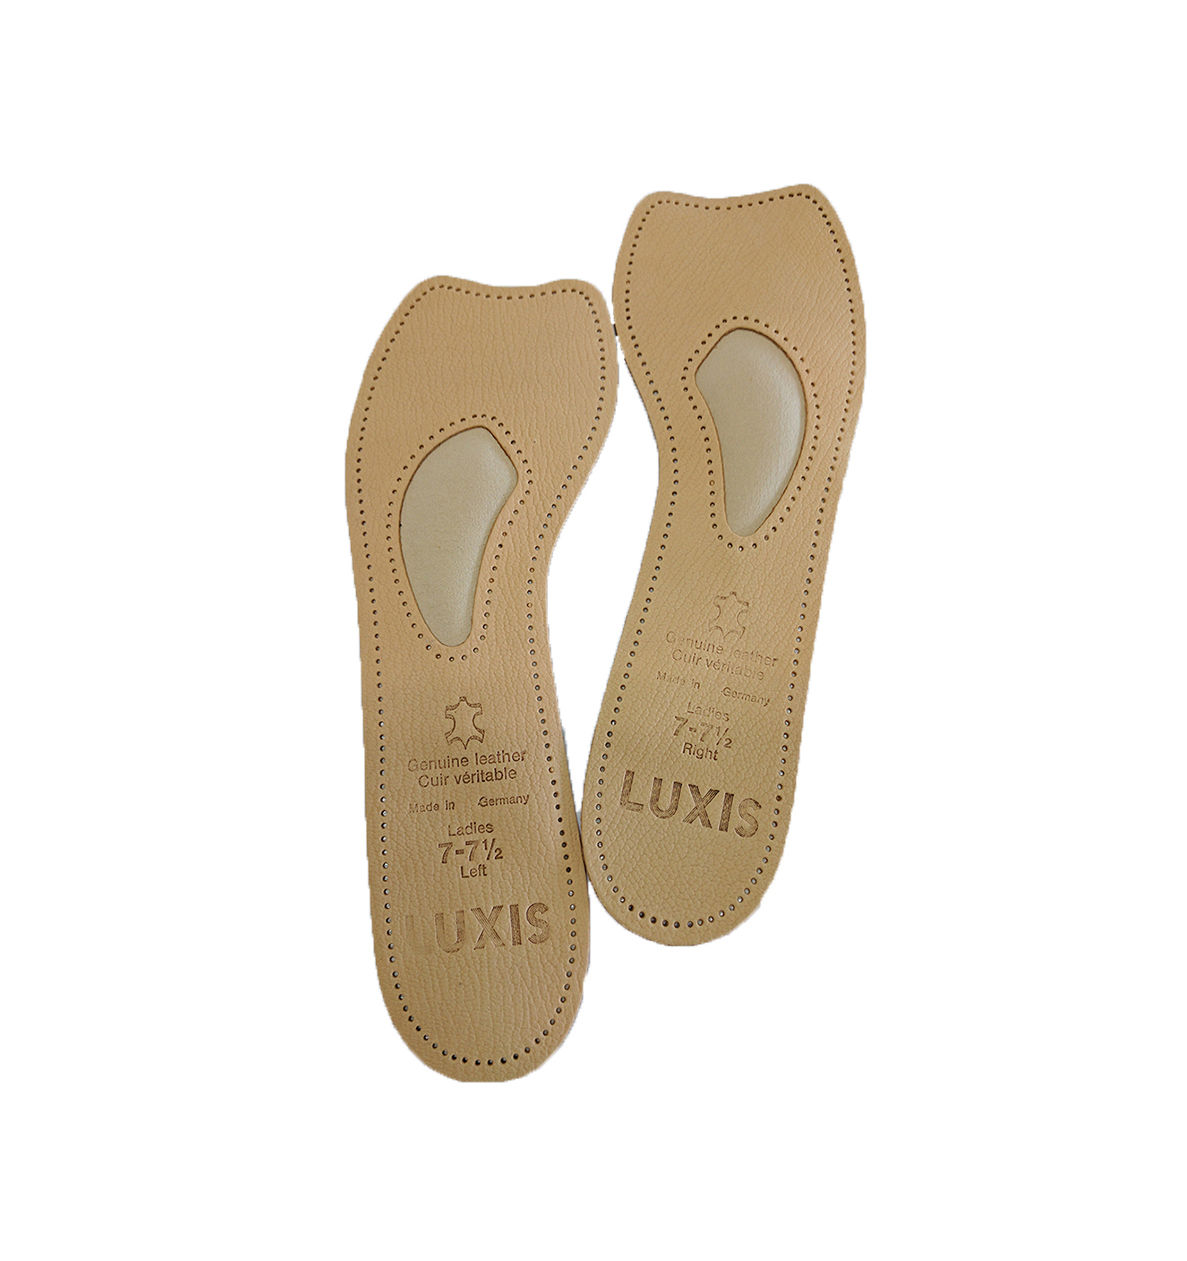 Luxis Insoles - Add comfort to all your shoes! Men's and Women's sizing